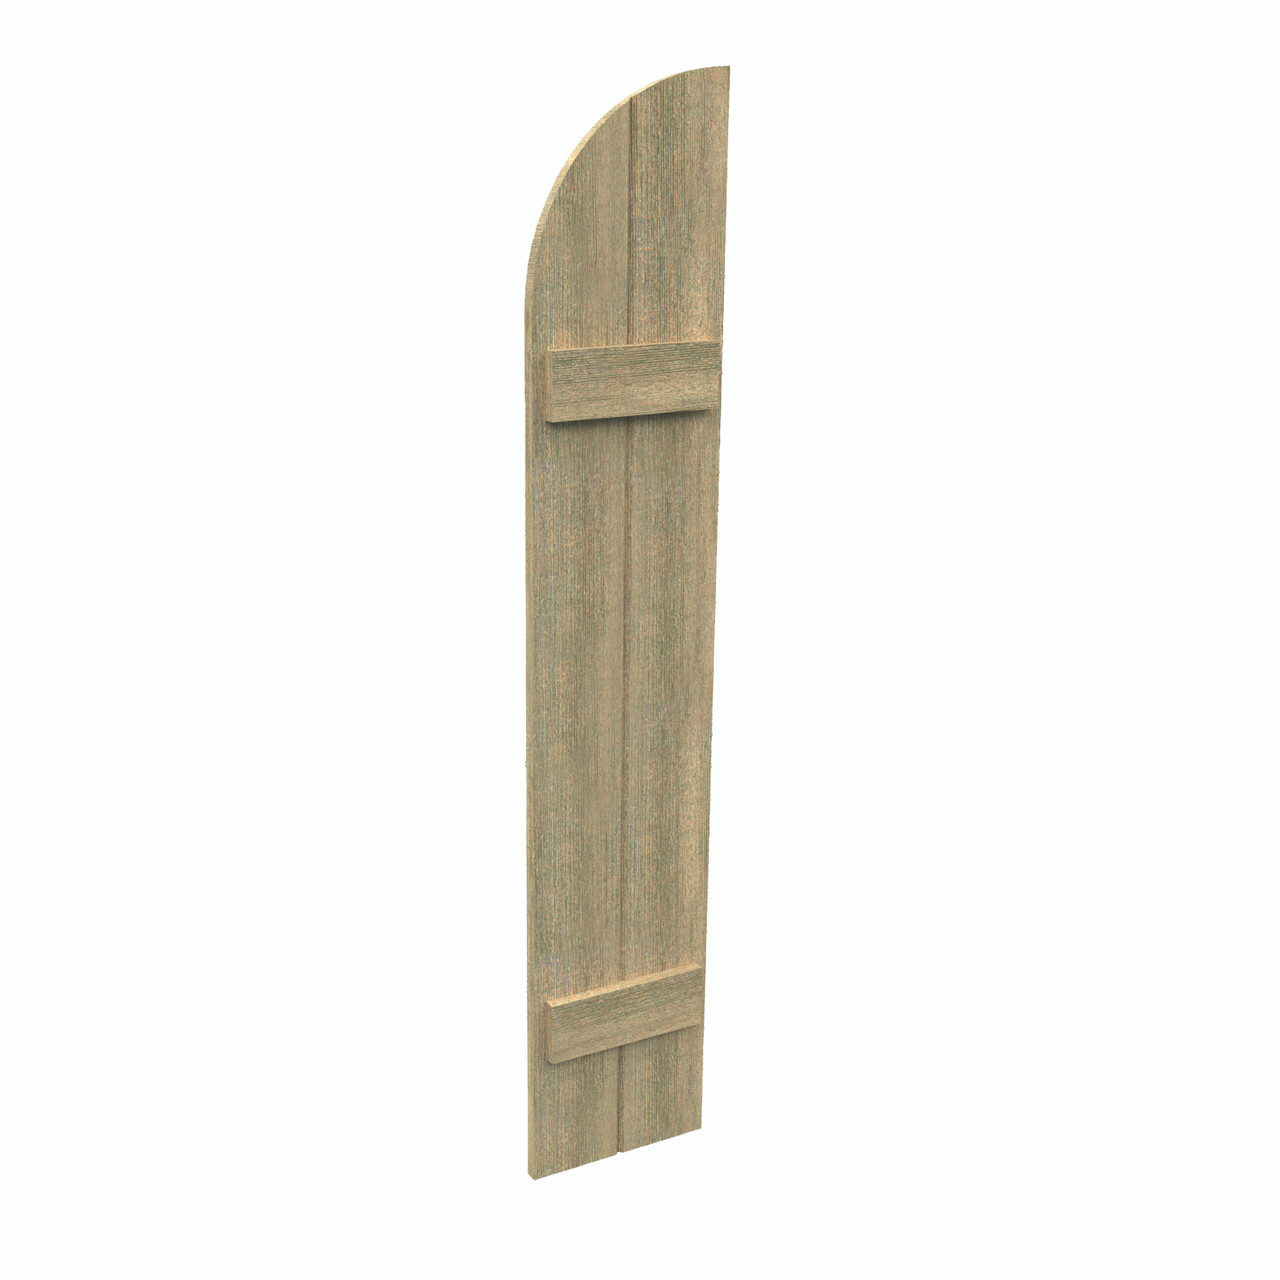 12 inch by 37 inch Quarter Round Shutter with 2-Boards